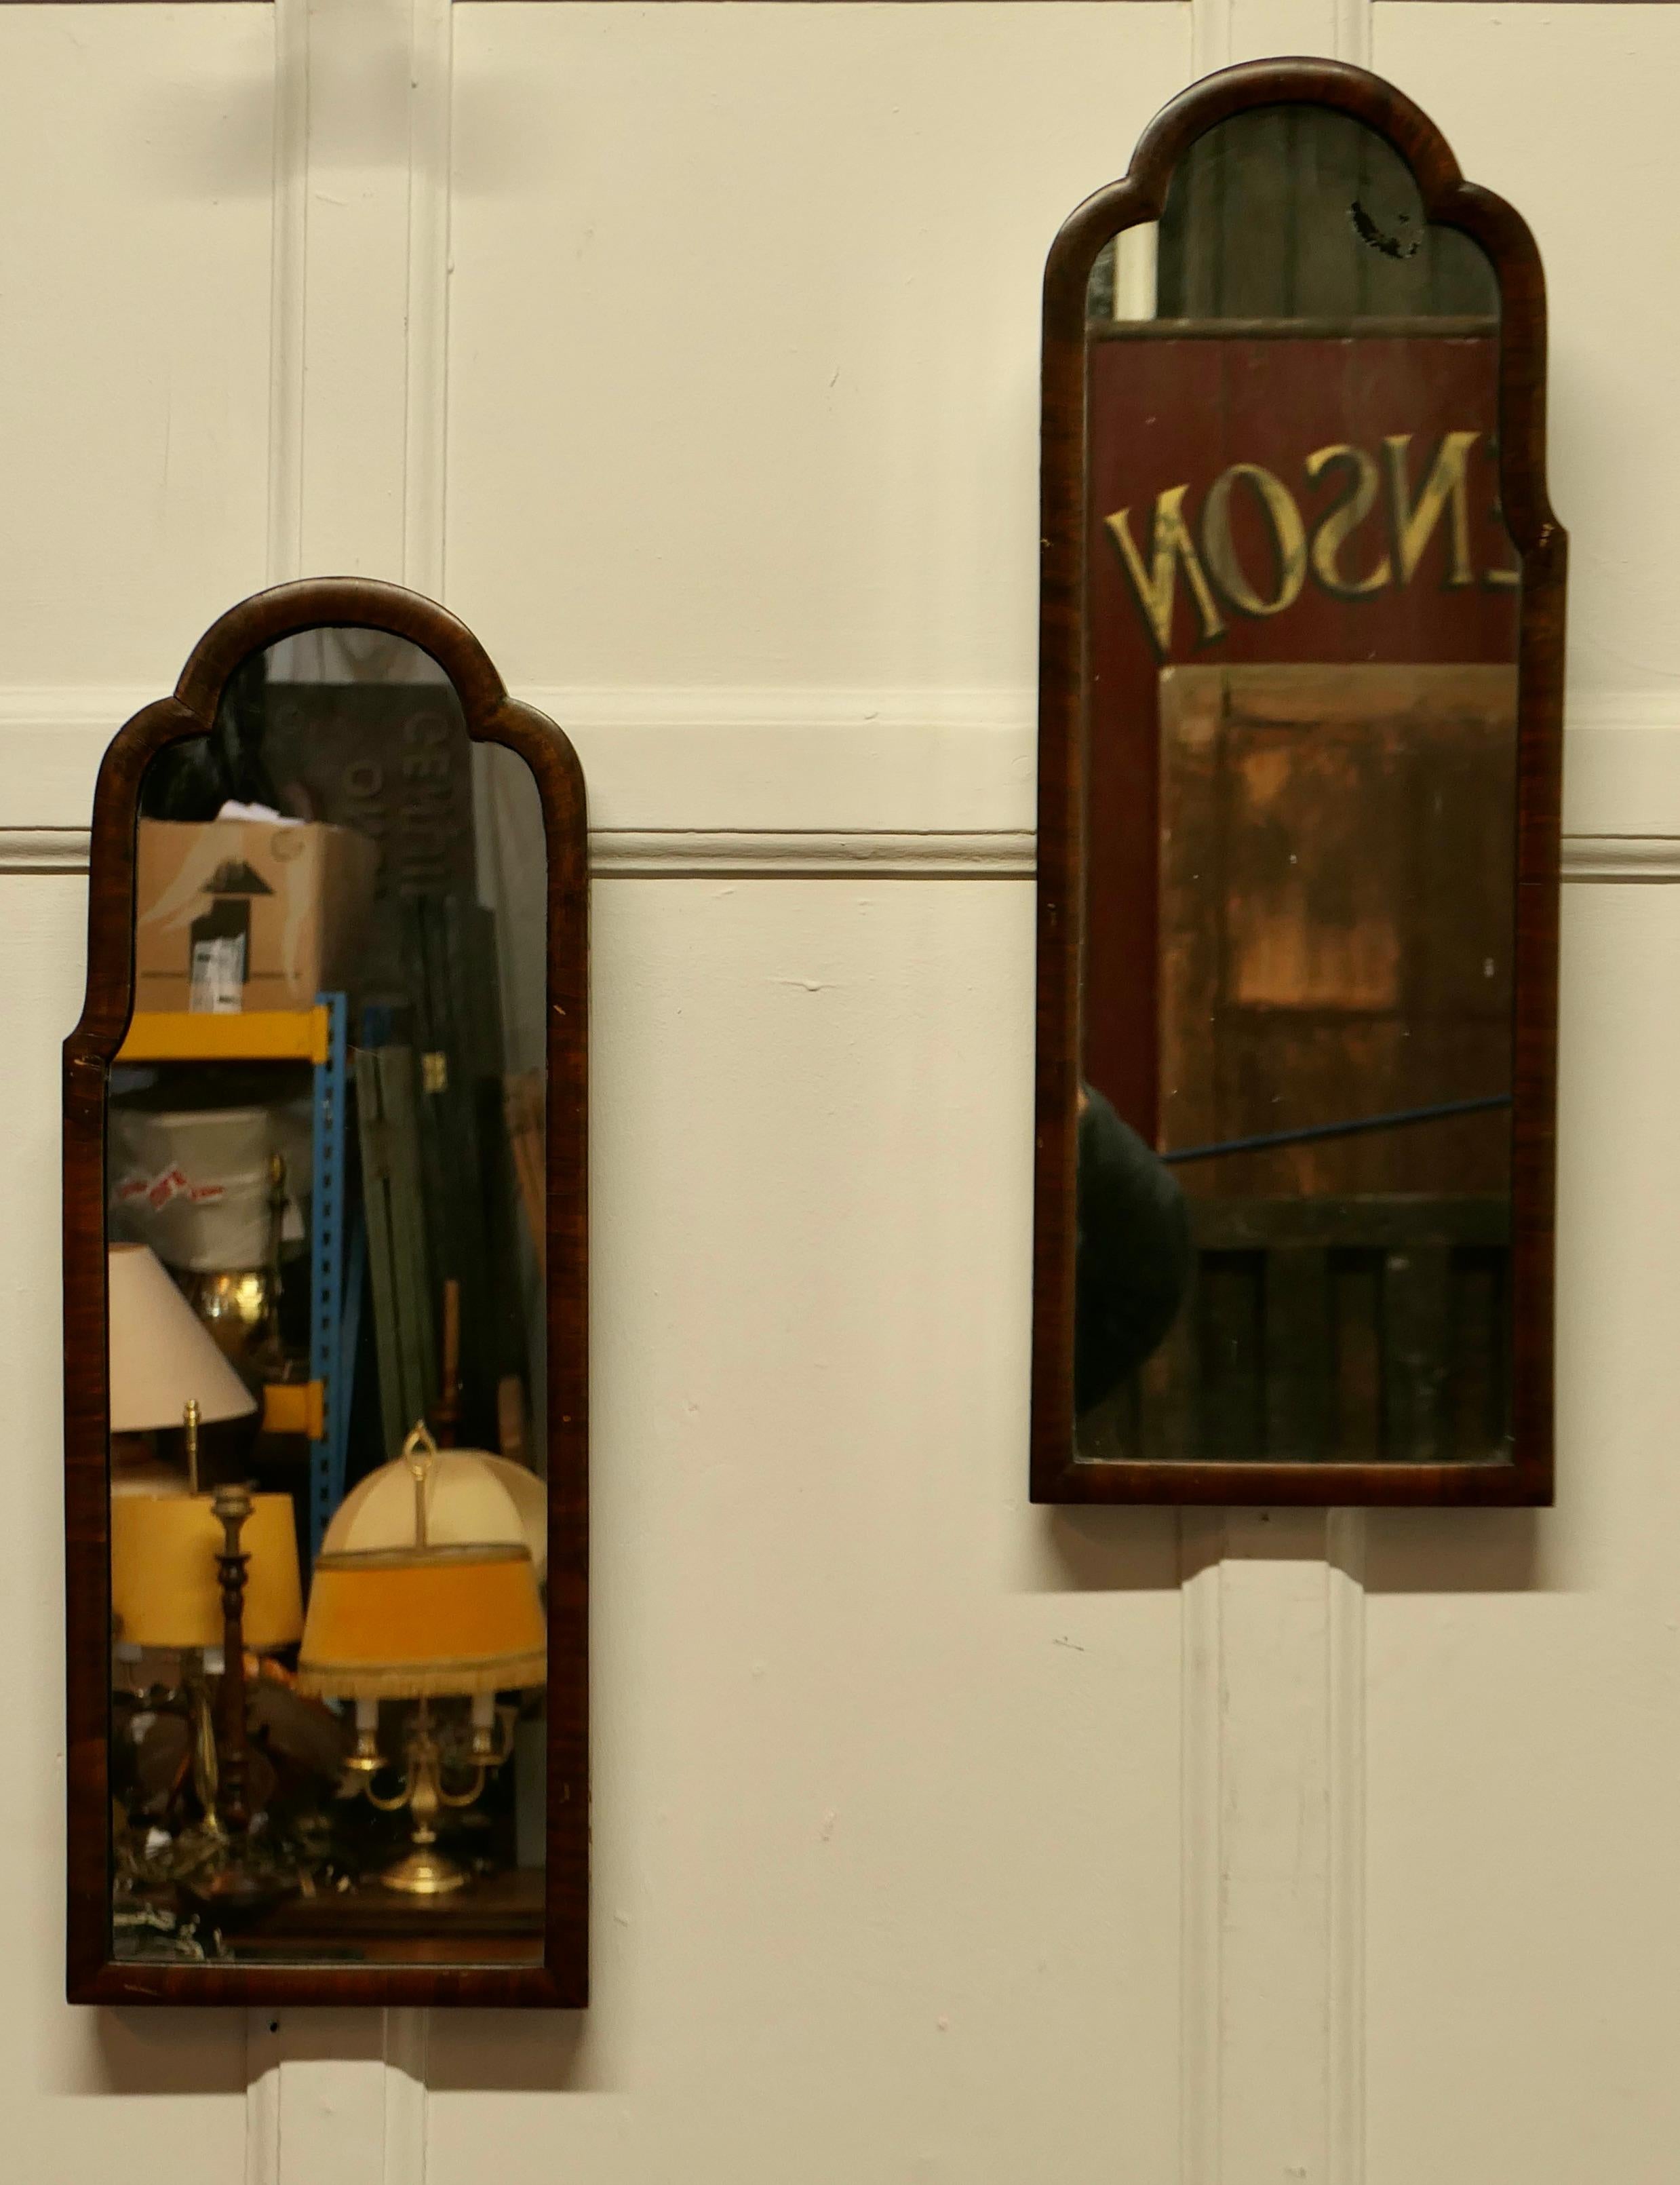 A Pair of Art Deco Asymmetric Walnut Mirrors

A Quirky pair, the mirrors have an inch wide Walnut frame they are long and thin and are wall hanging The mirrors are in mostly good condition with a bit of foxing to the top arch of one
The mirrors are